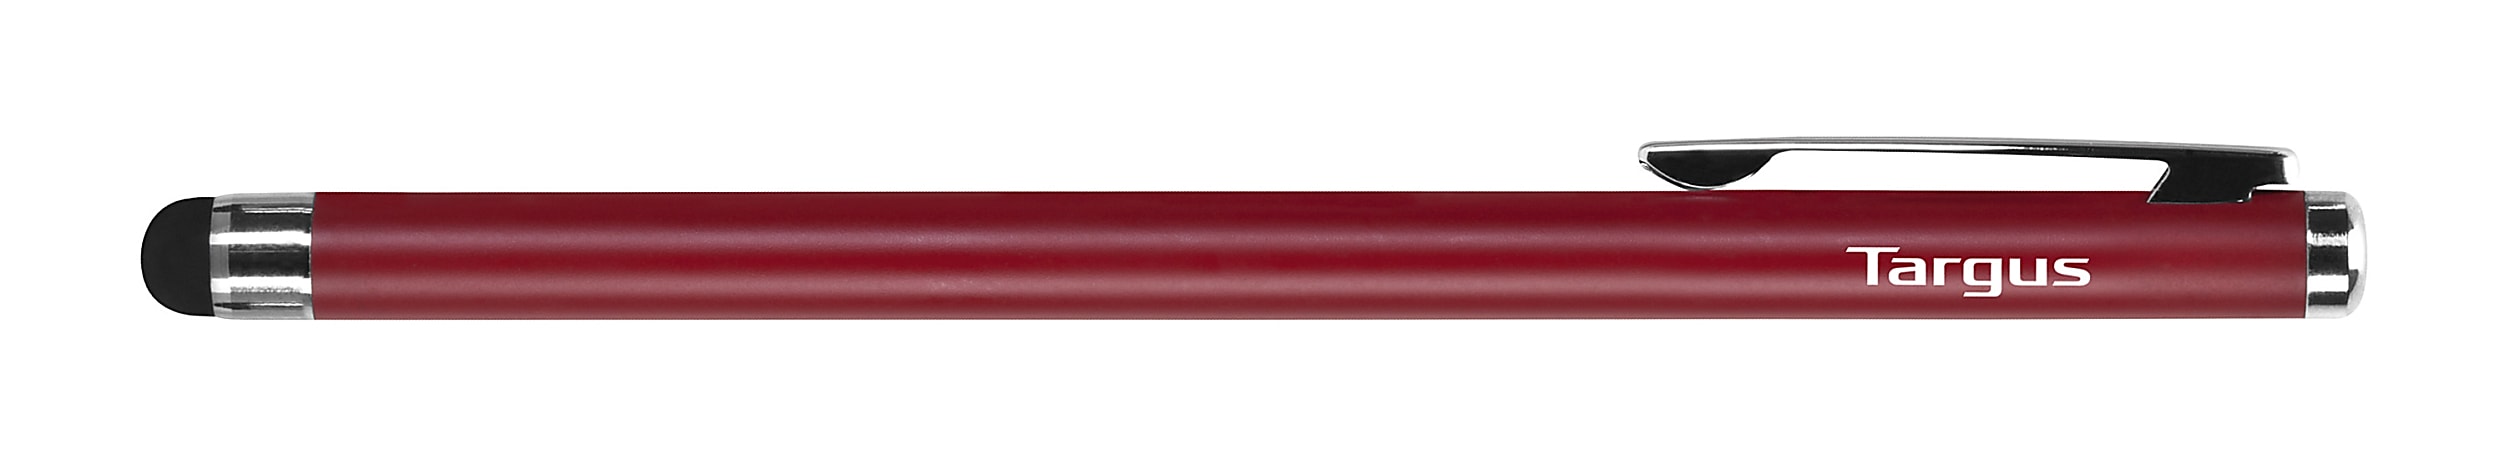 Targus® Slim Stylus For Touch-Screen Displays, Red